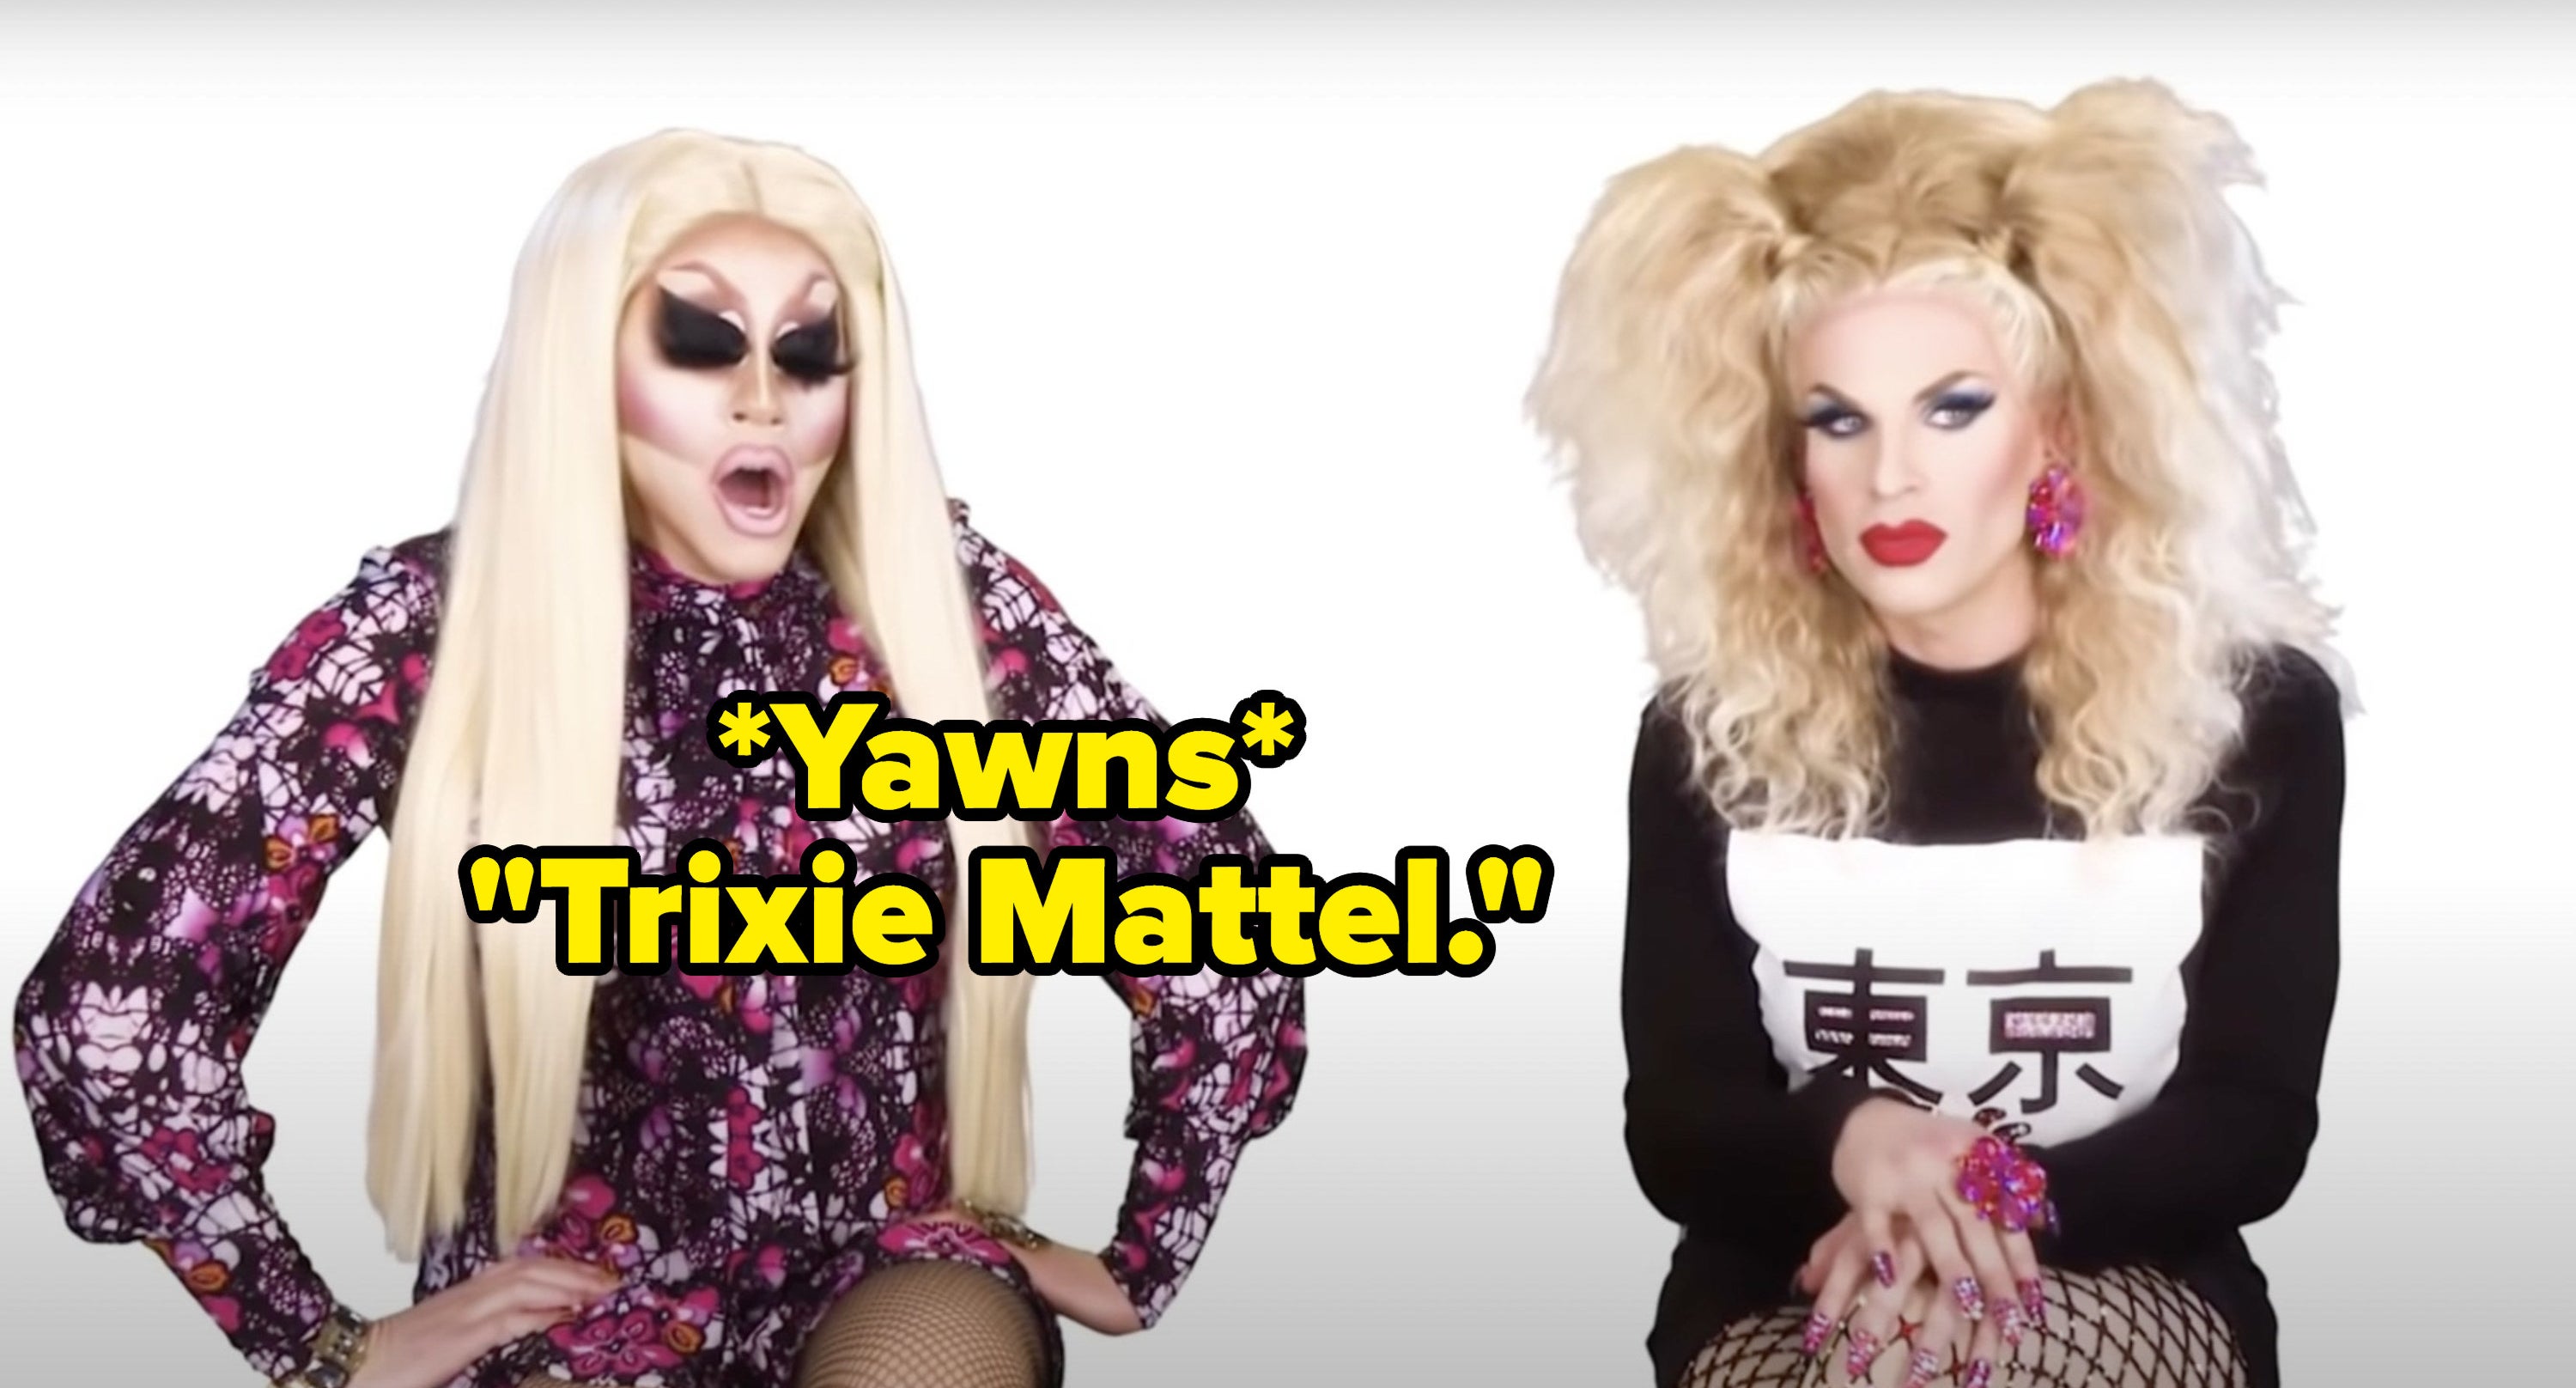 Trixie yawns and then says Trixie Mattel